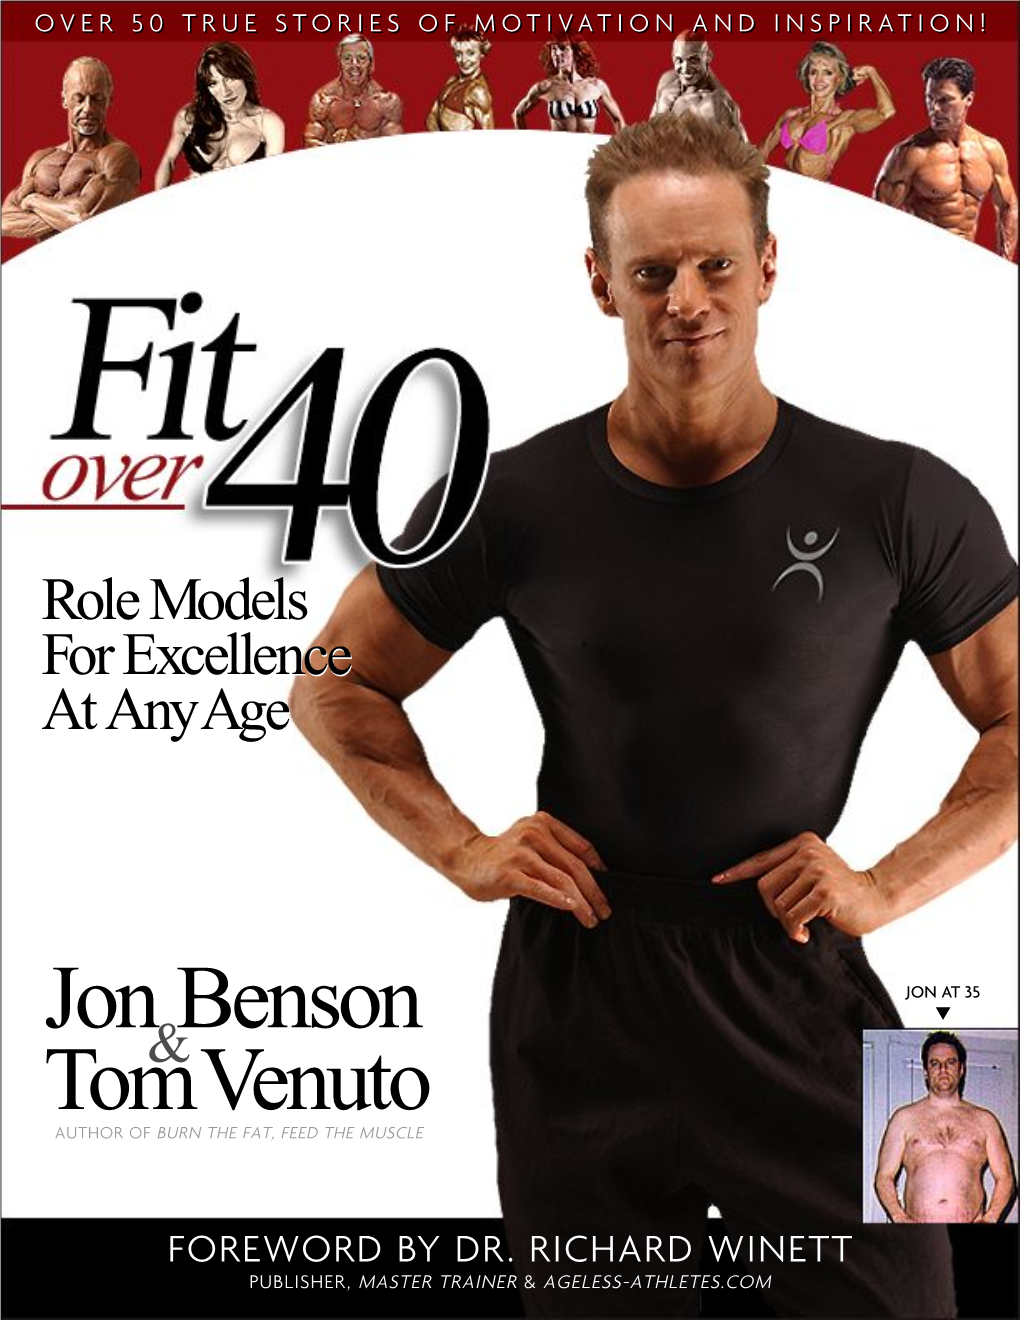 Fit Over 40™ Is a Trademark of Fitover40 Publishing, LLC